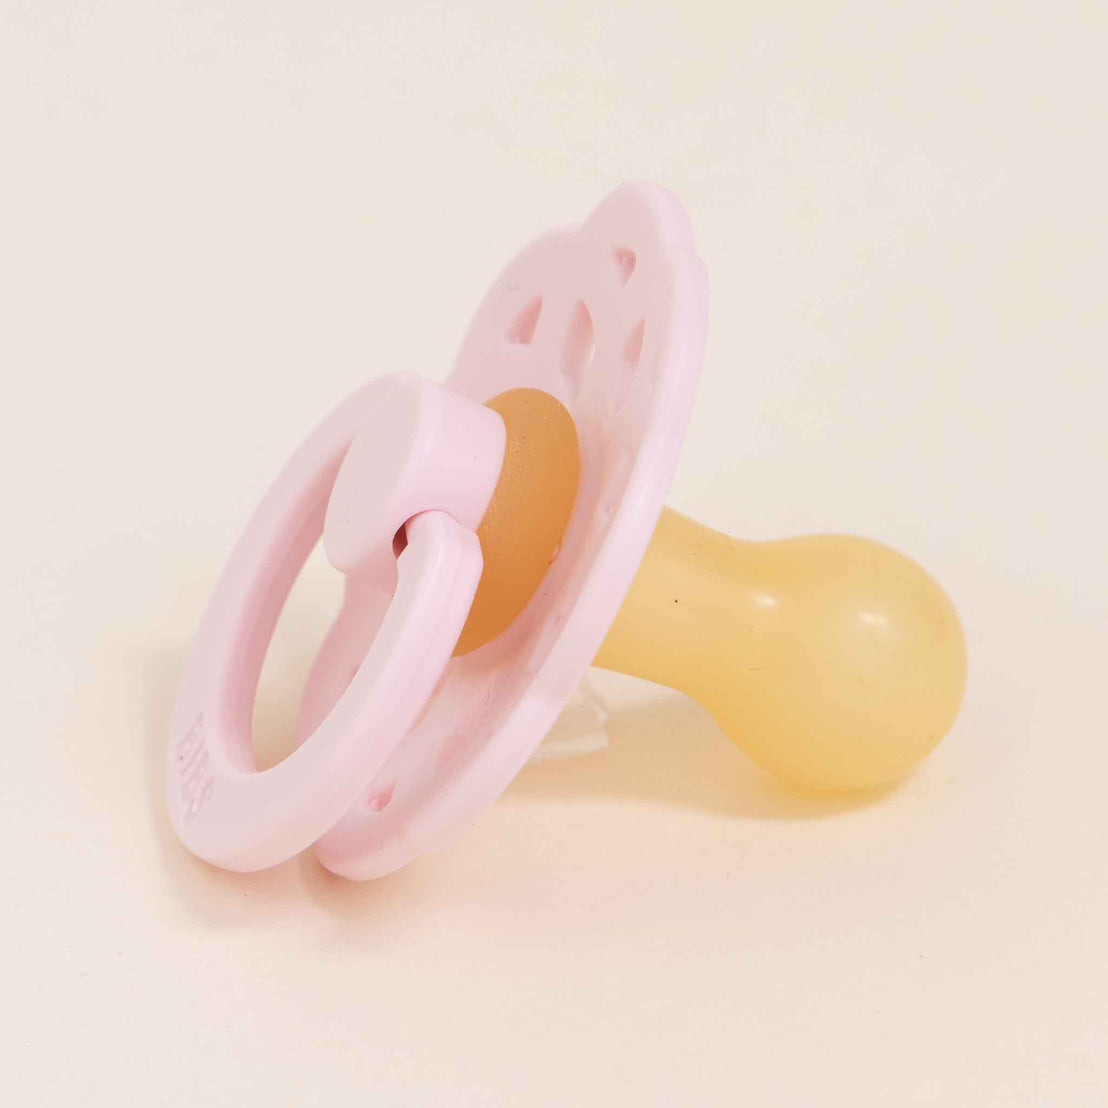 A pink and yellow Bibs Lace Pacifier made from natural rubber, lying on a light beige background.